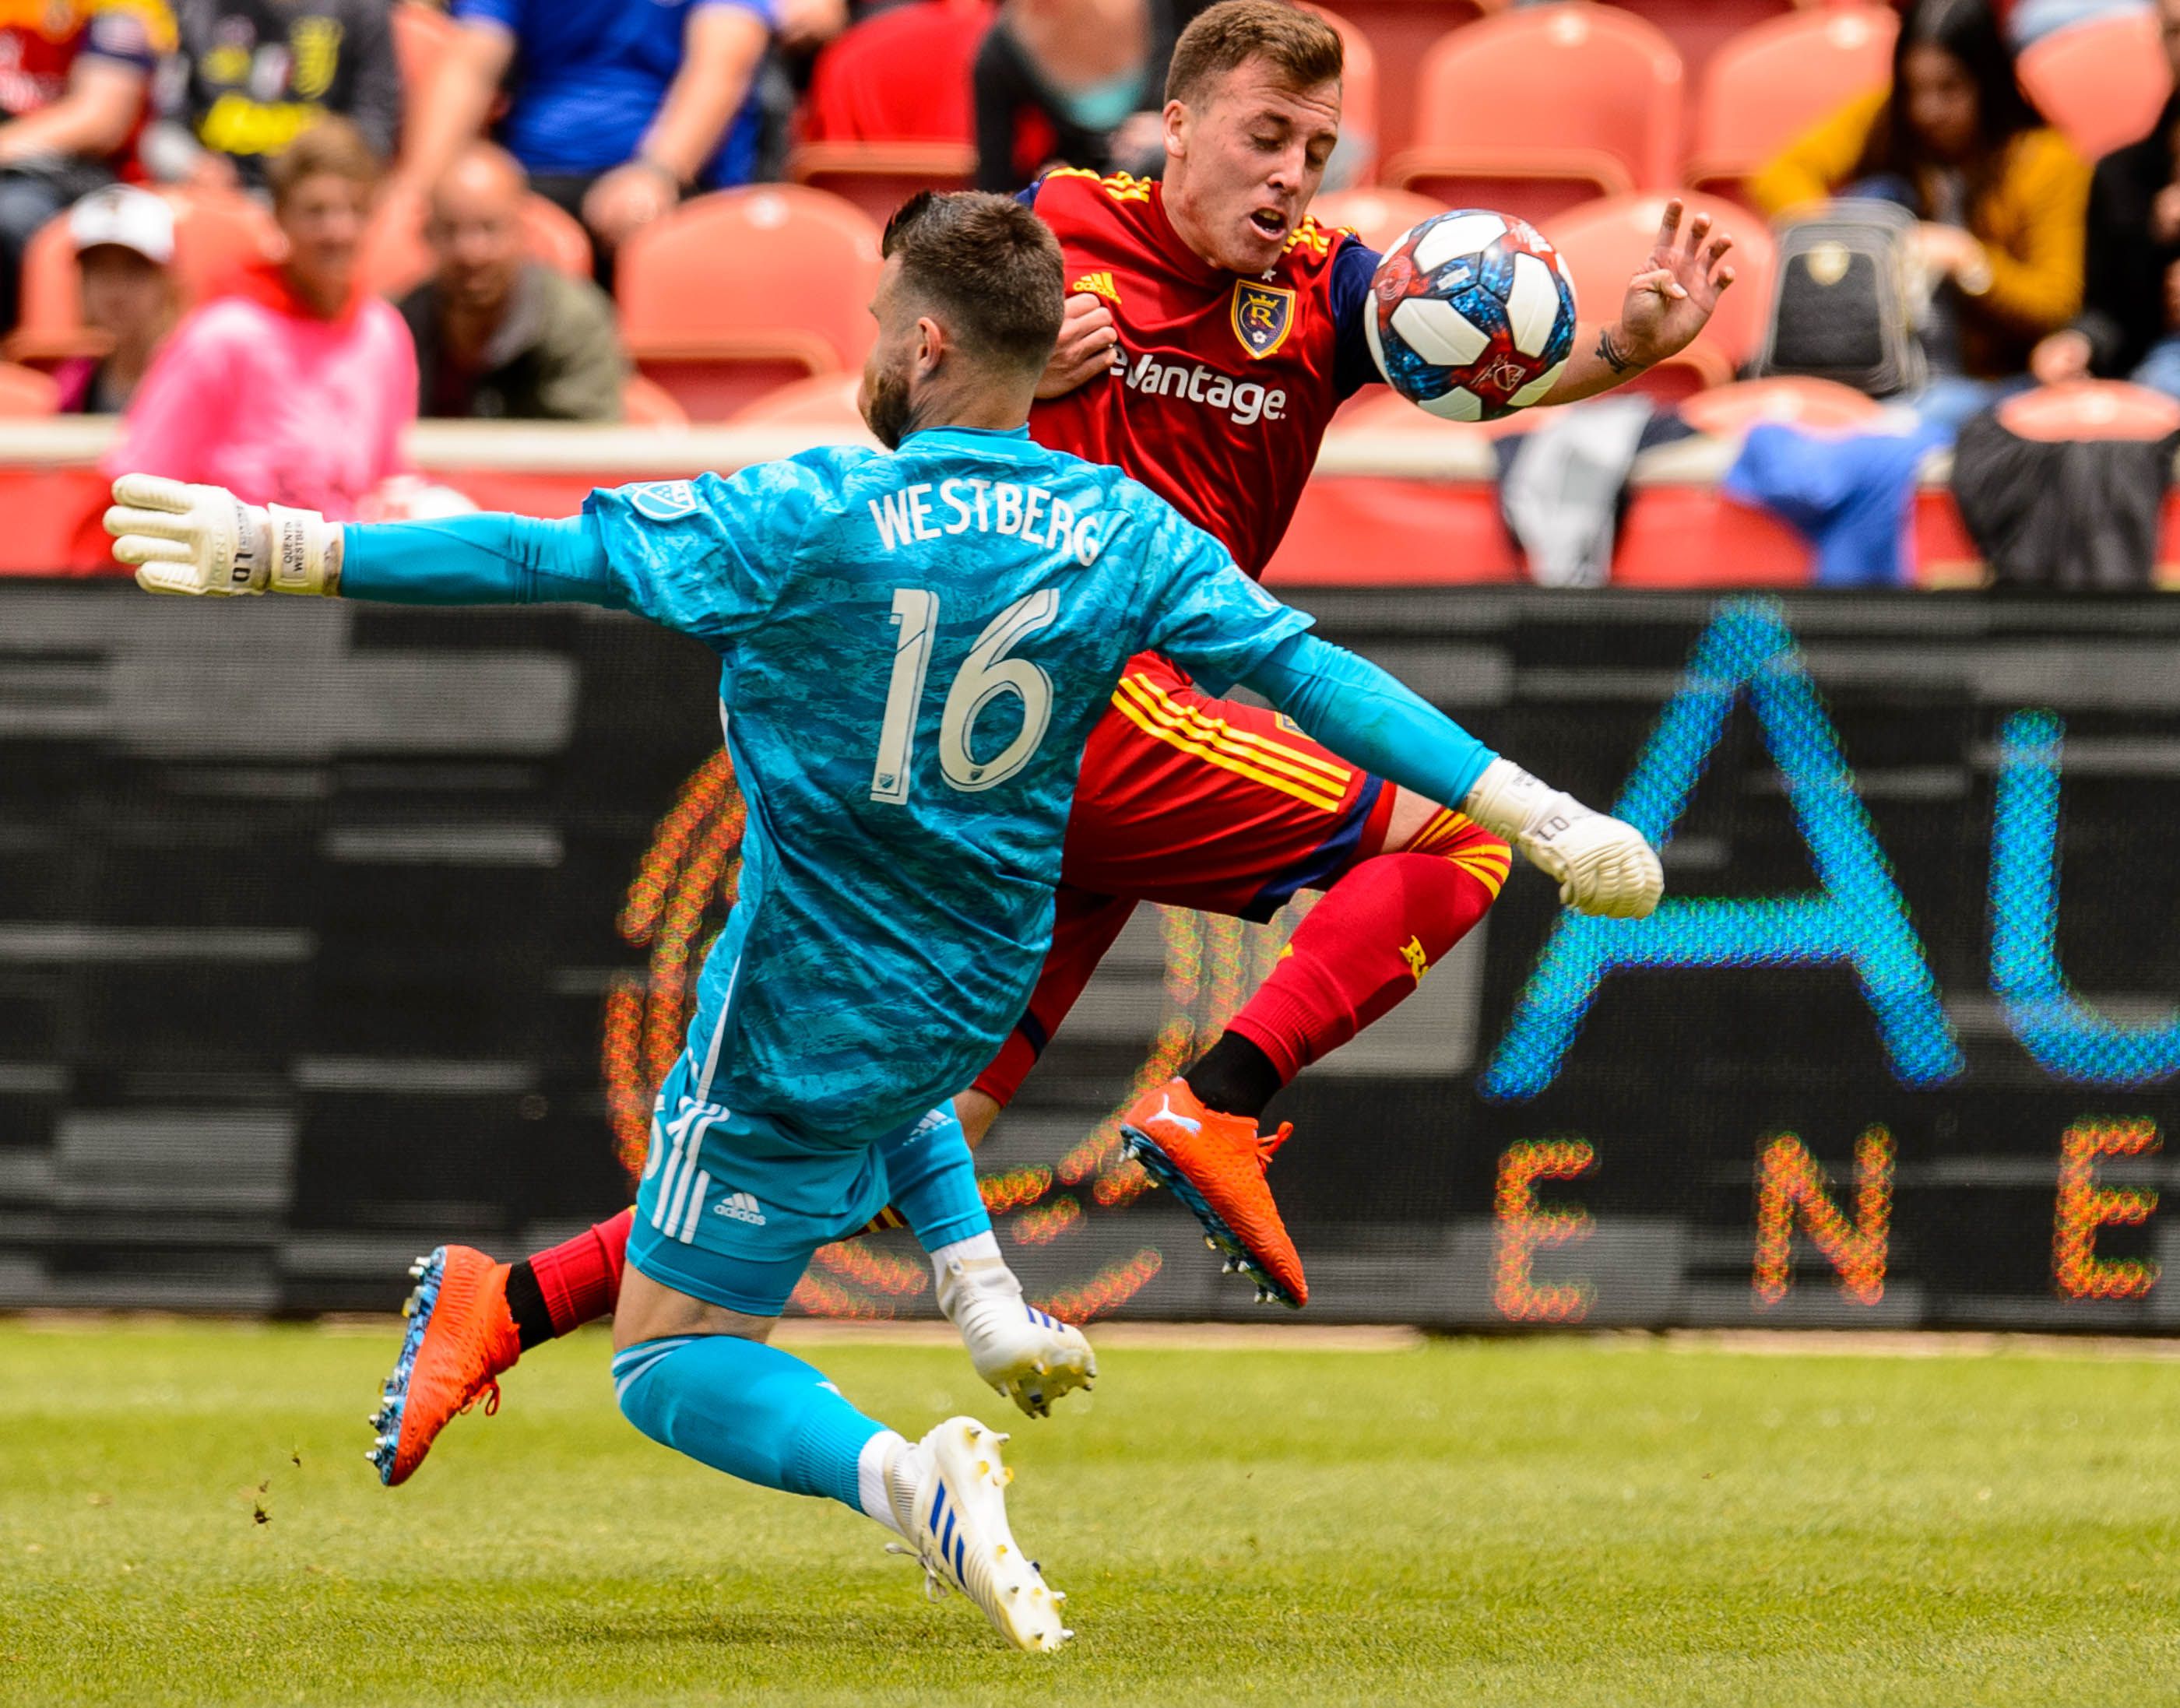 Toronto FC sign goalkeeper Quentin Westberg to new contract